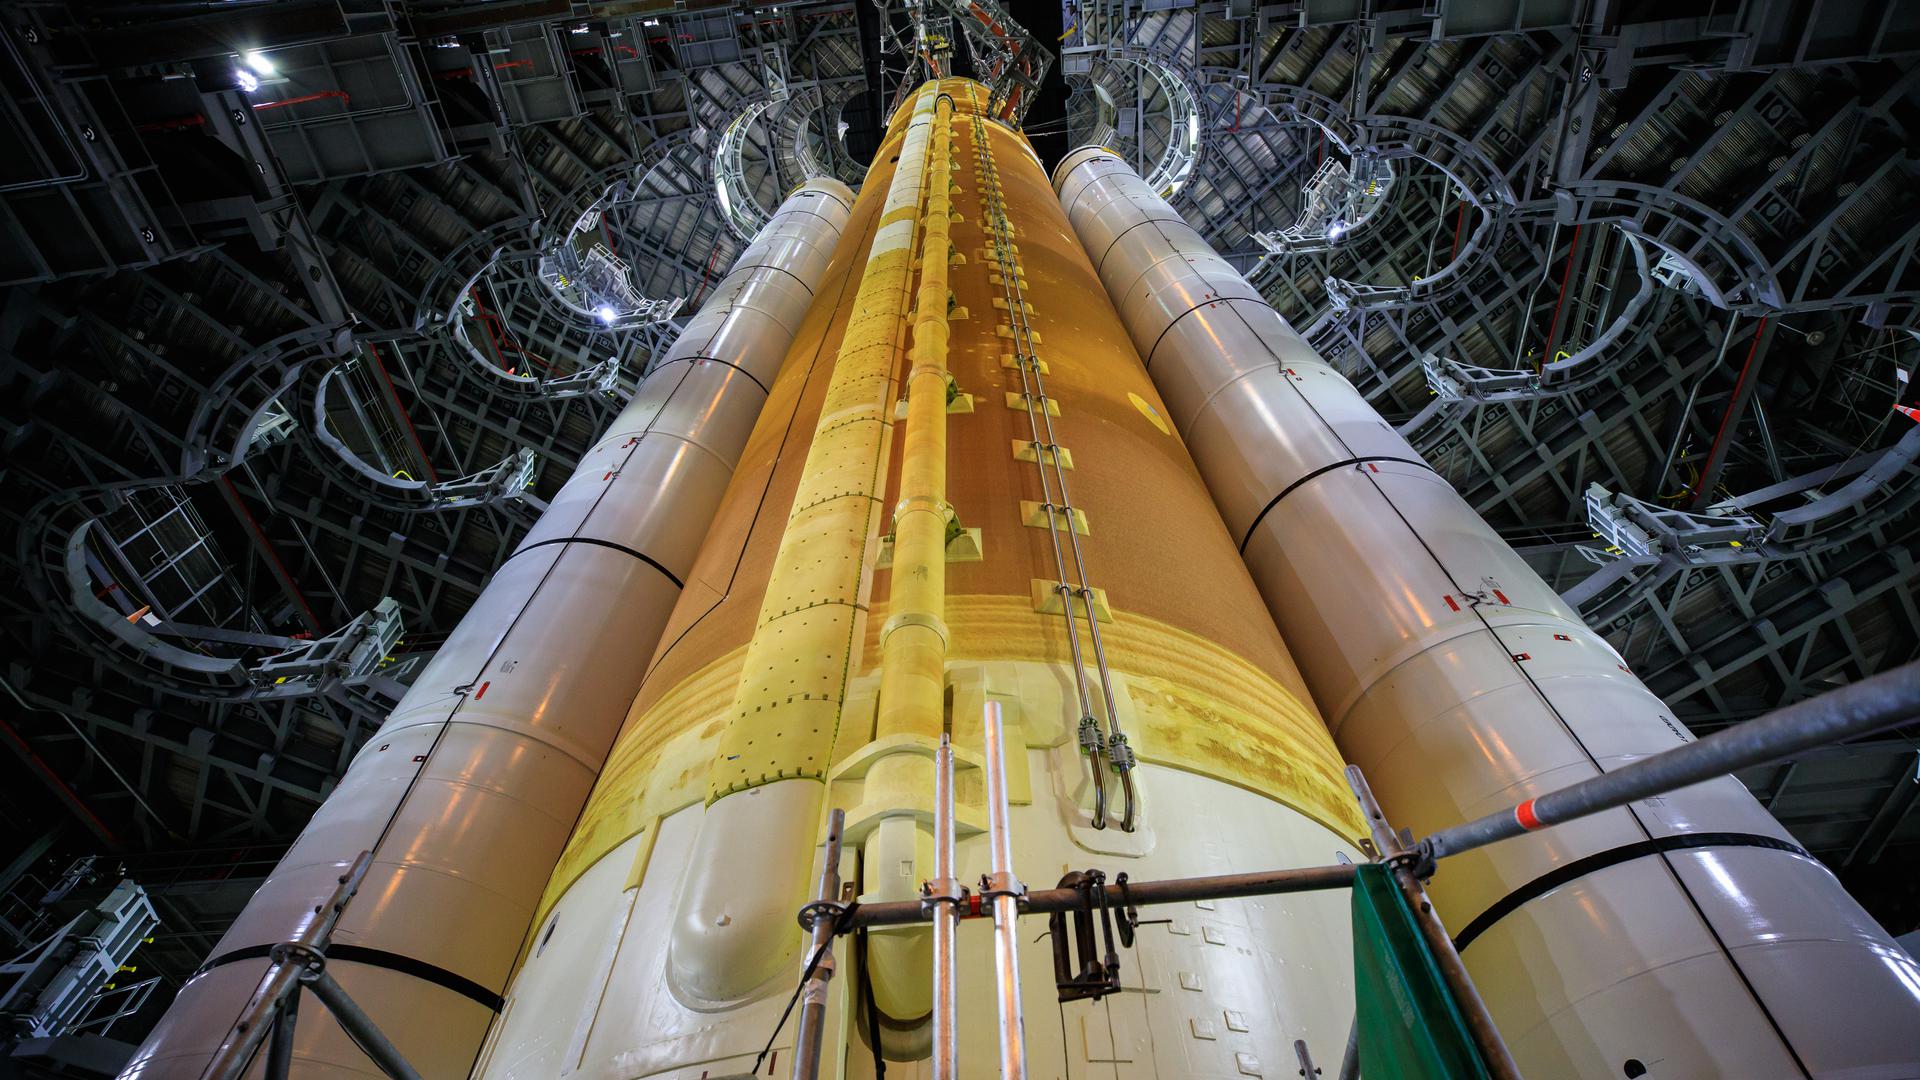 A close-up view of the Artemis I Space Launch System rocket inside High Bay 3 of the Vehicle Assembly Building at NASA’s Kennedy Space Center in Florida on Sept. 20, 2021.